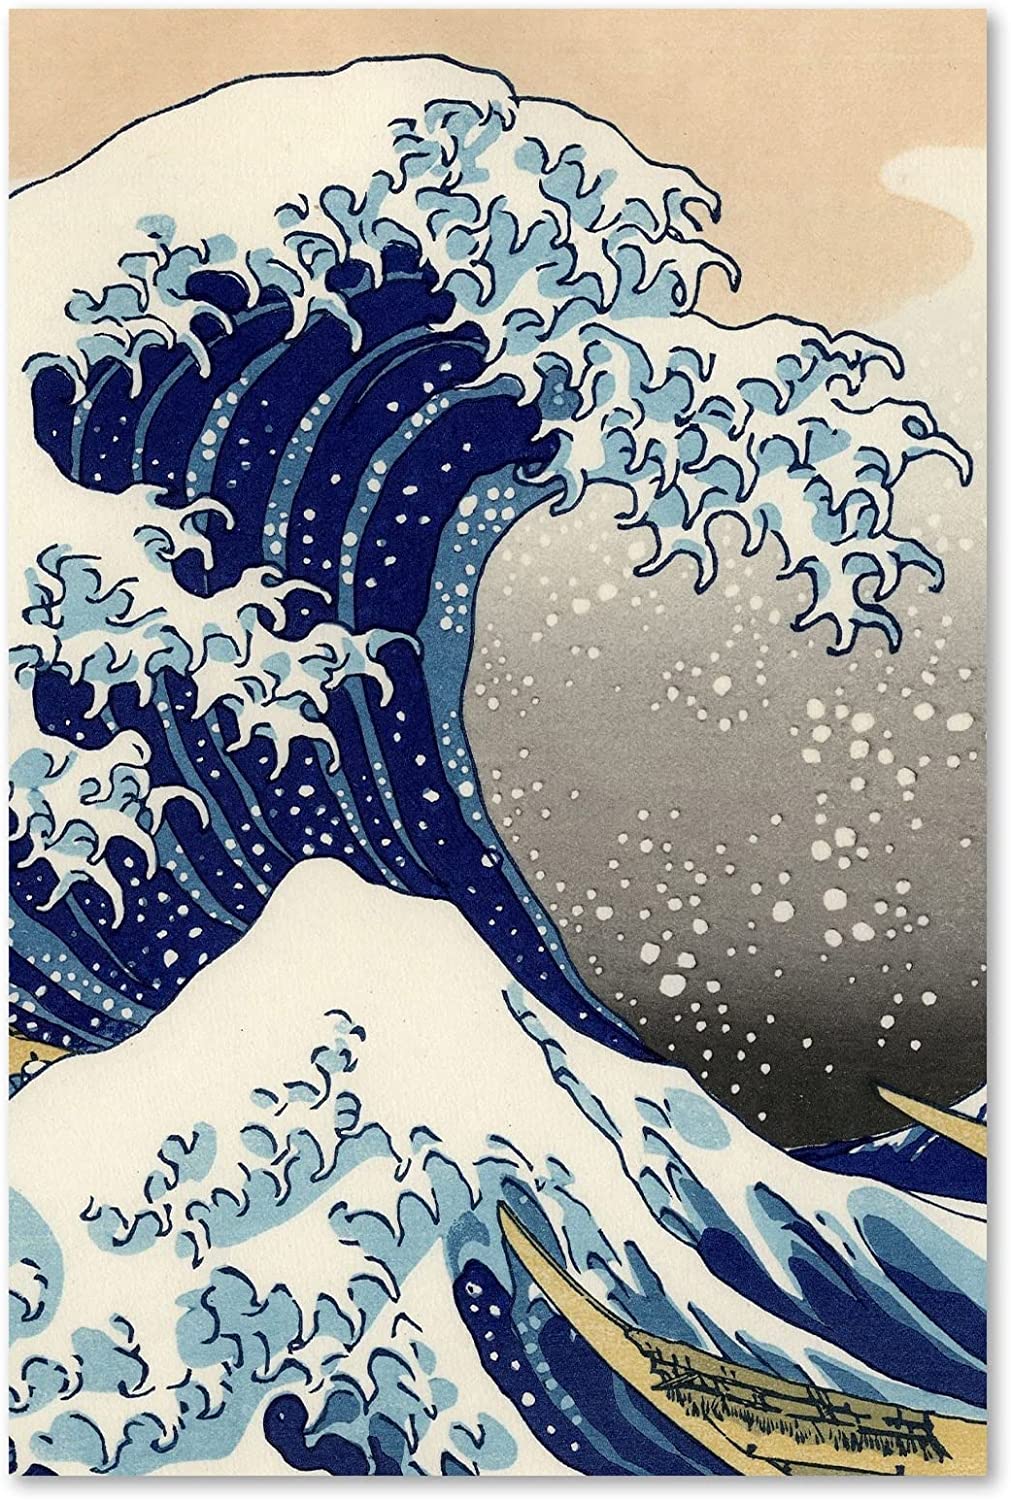 Canvas Art Print The Great Wave Off Kanagawa Canvas Print Wall Painting Classic Mural Poster Giclee Artwork Picture Modern Home Decor For Living Room Bedroom Office Unframed 12x18 in: Posters